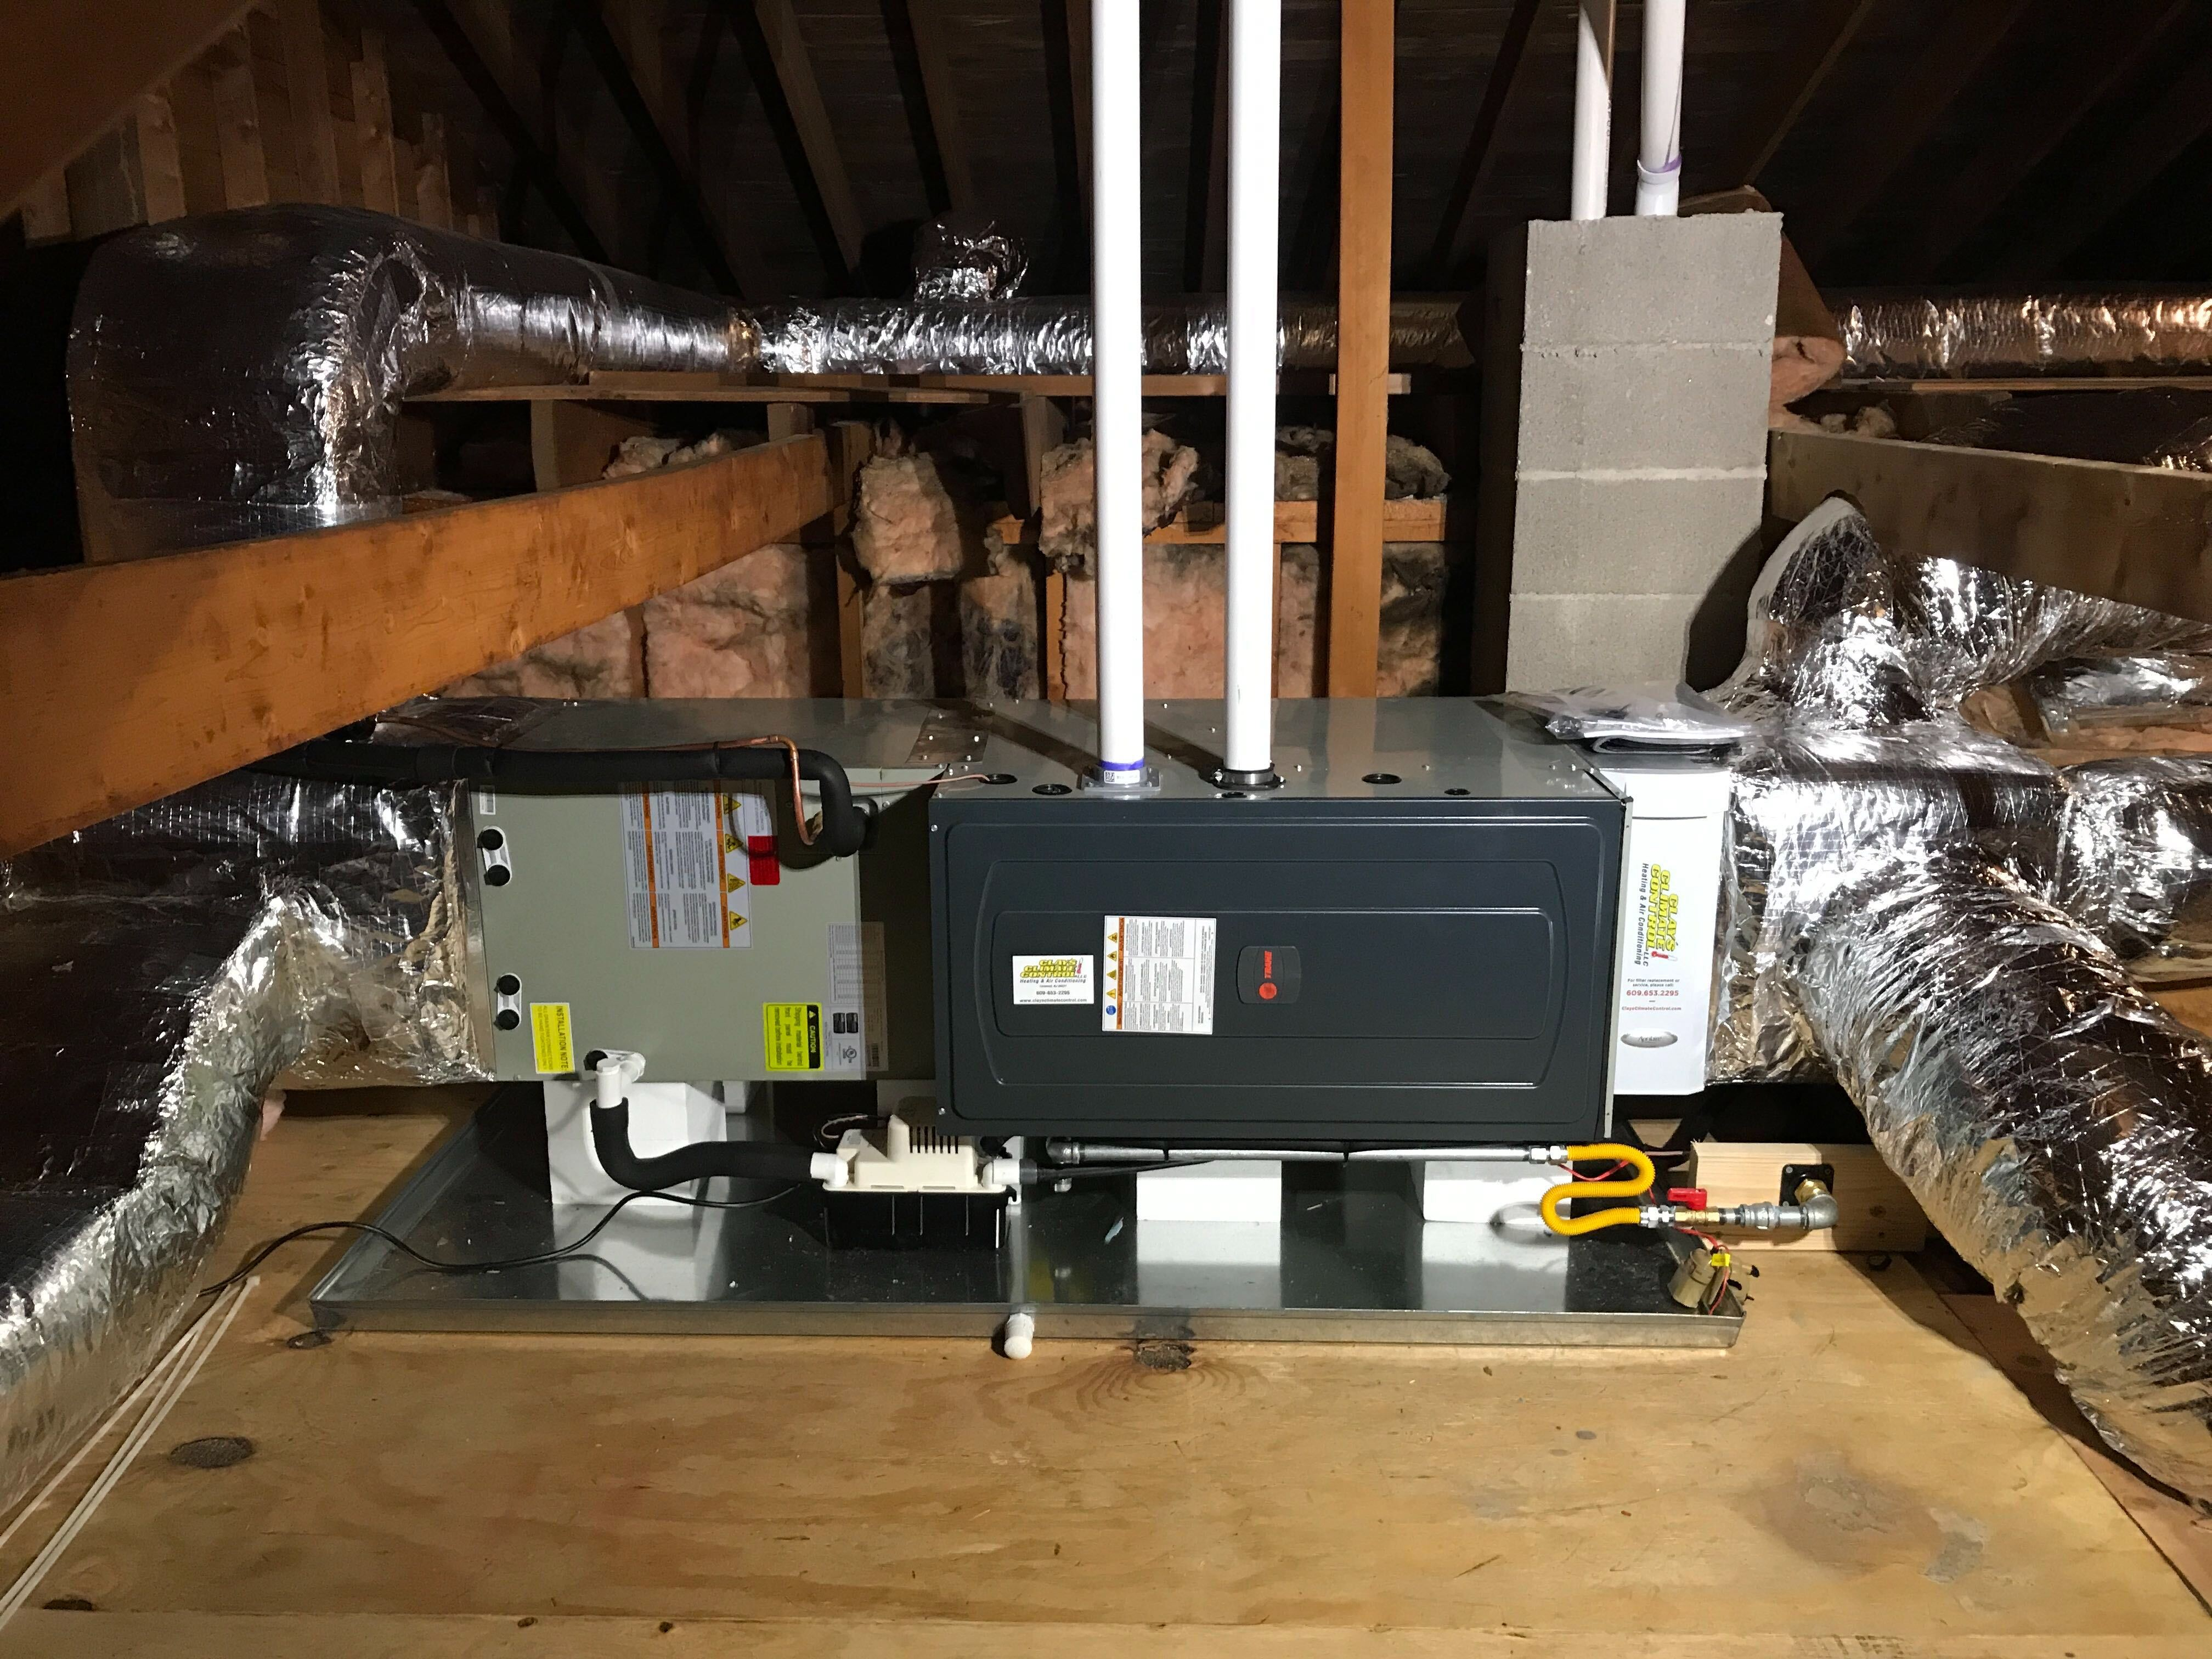 Clay’s Climate Control Completes Installation of a